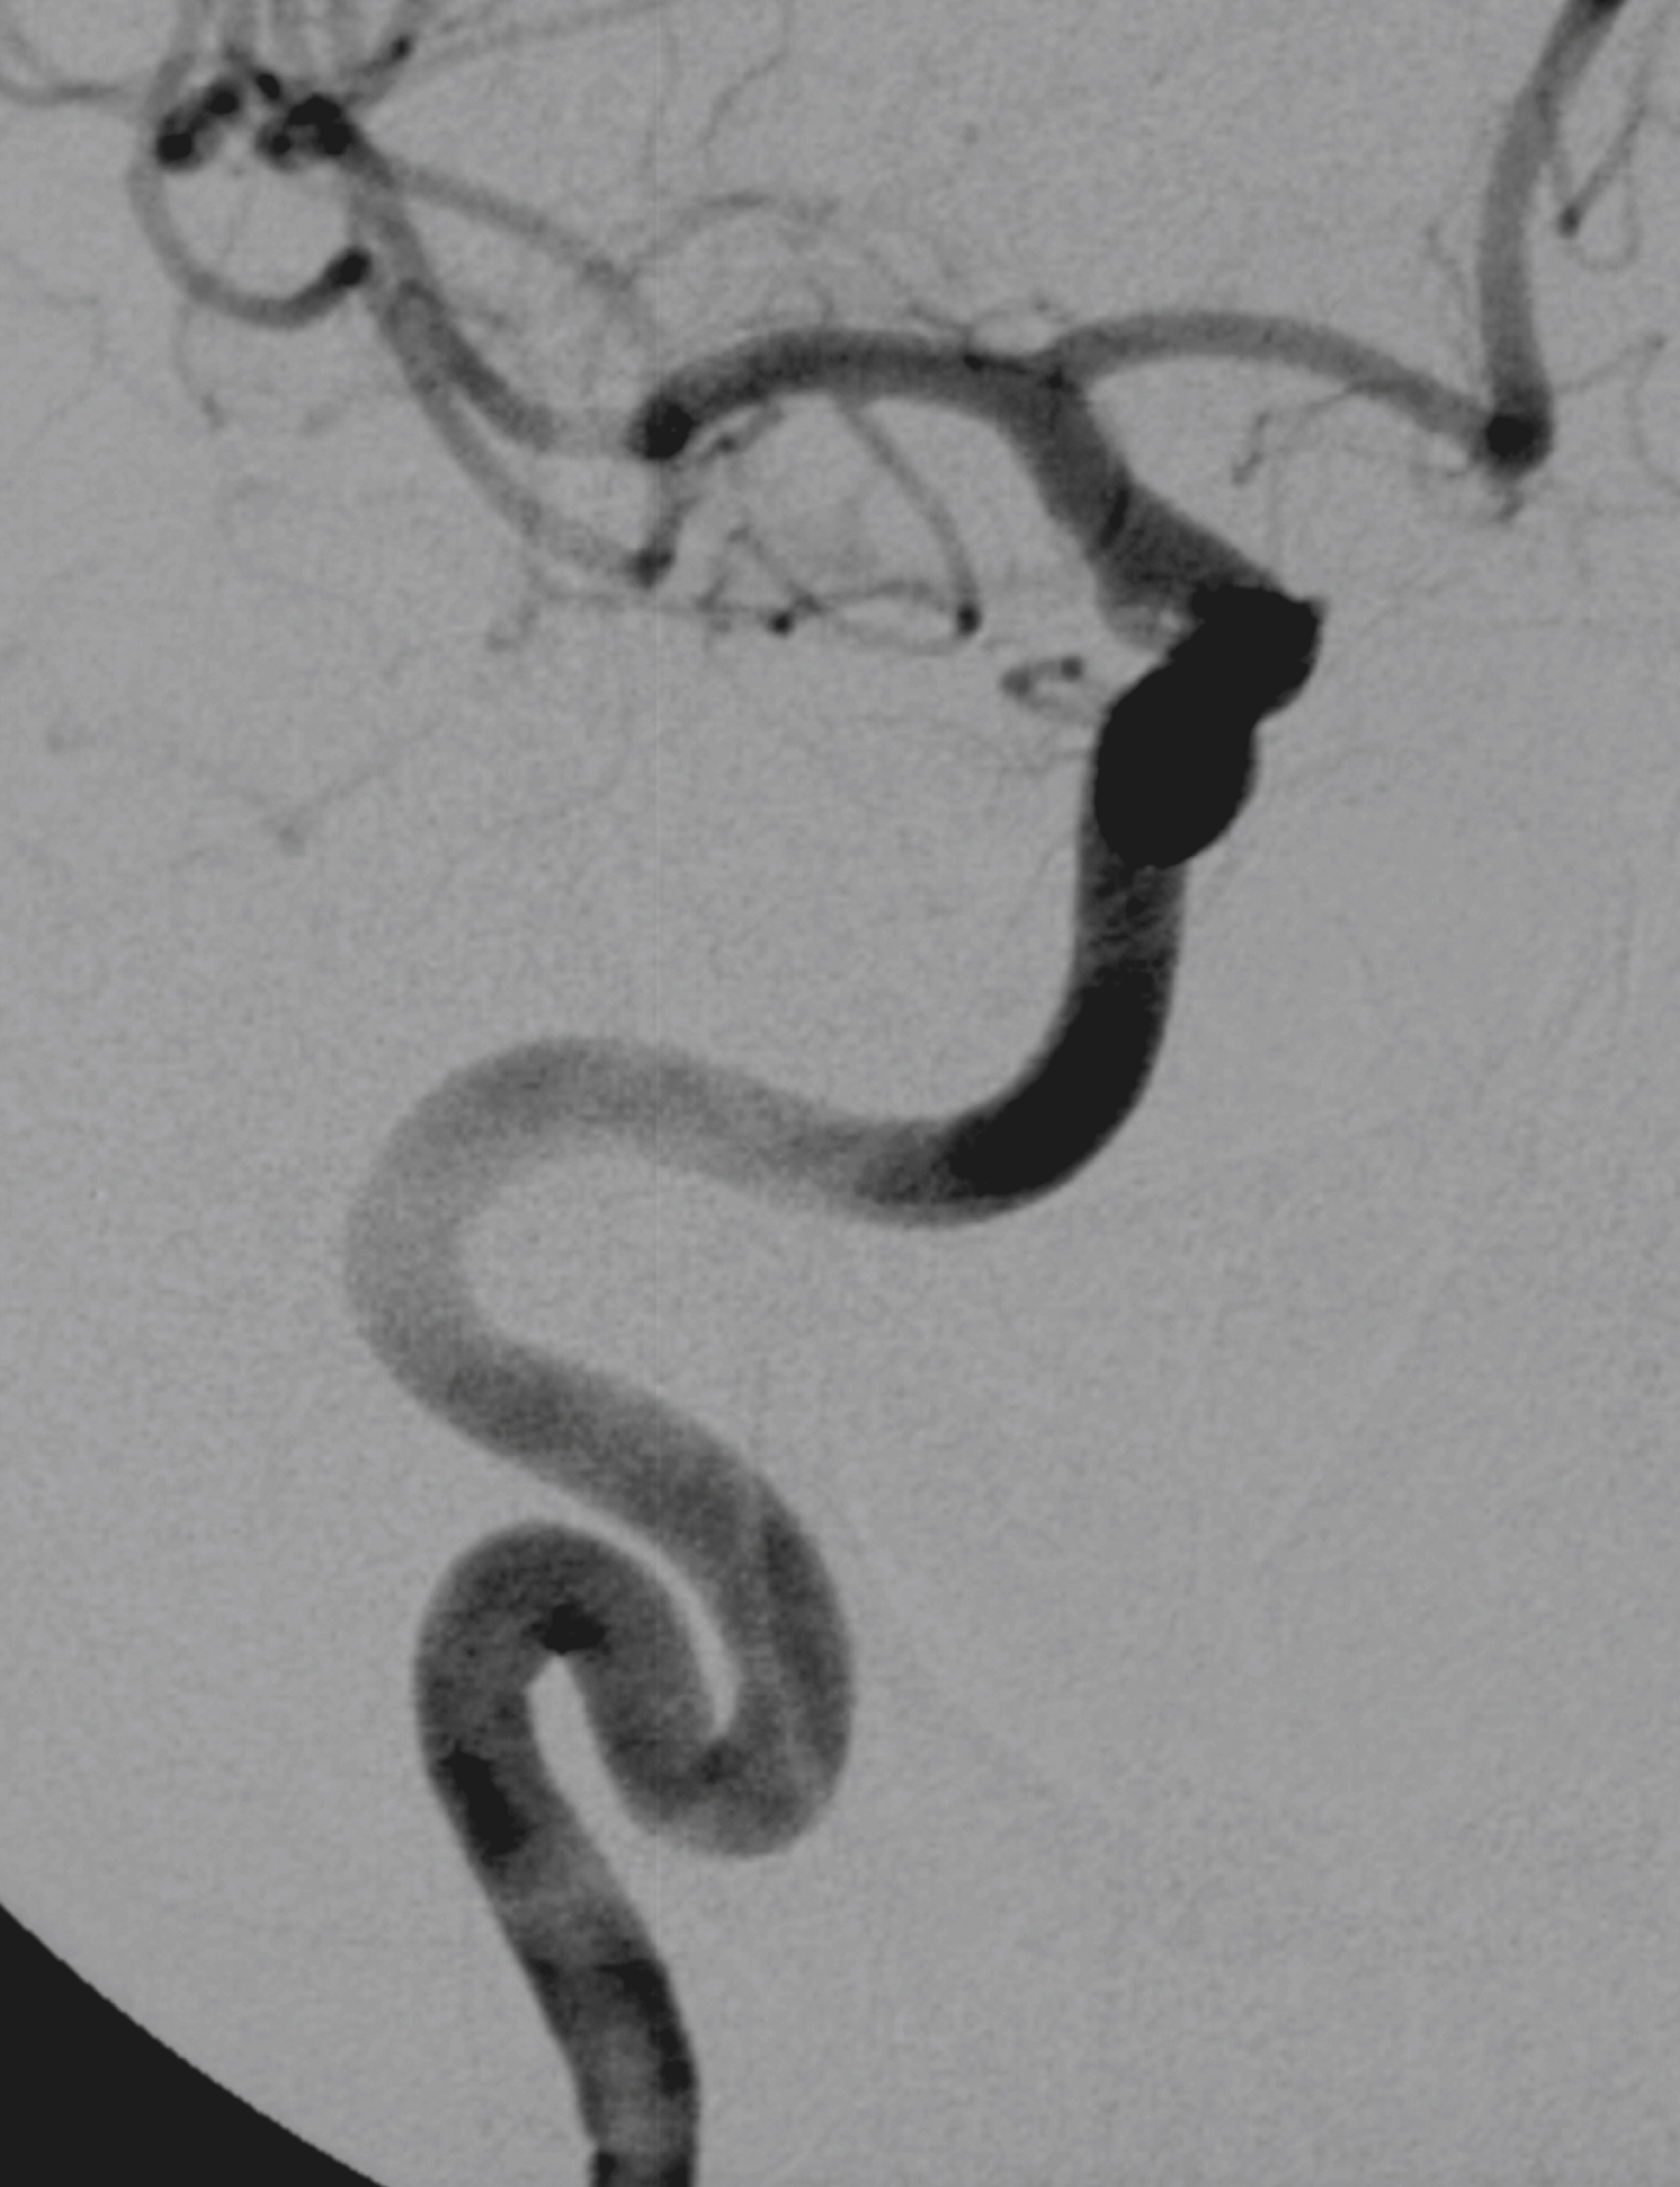 Fig. 56.5, Digital subtraction angiogram, internal carotid artery (ICA) injection, oblique view showing smooth congenital sinuosity of ICA.